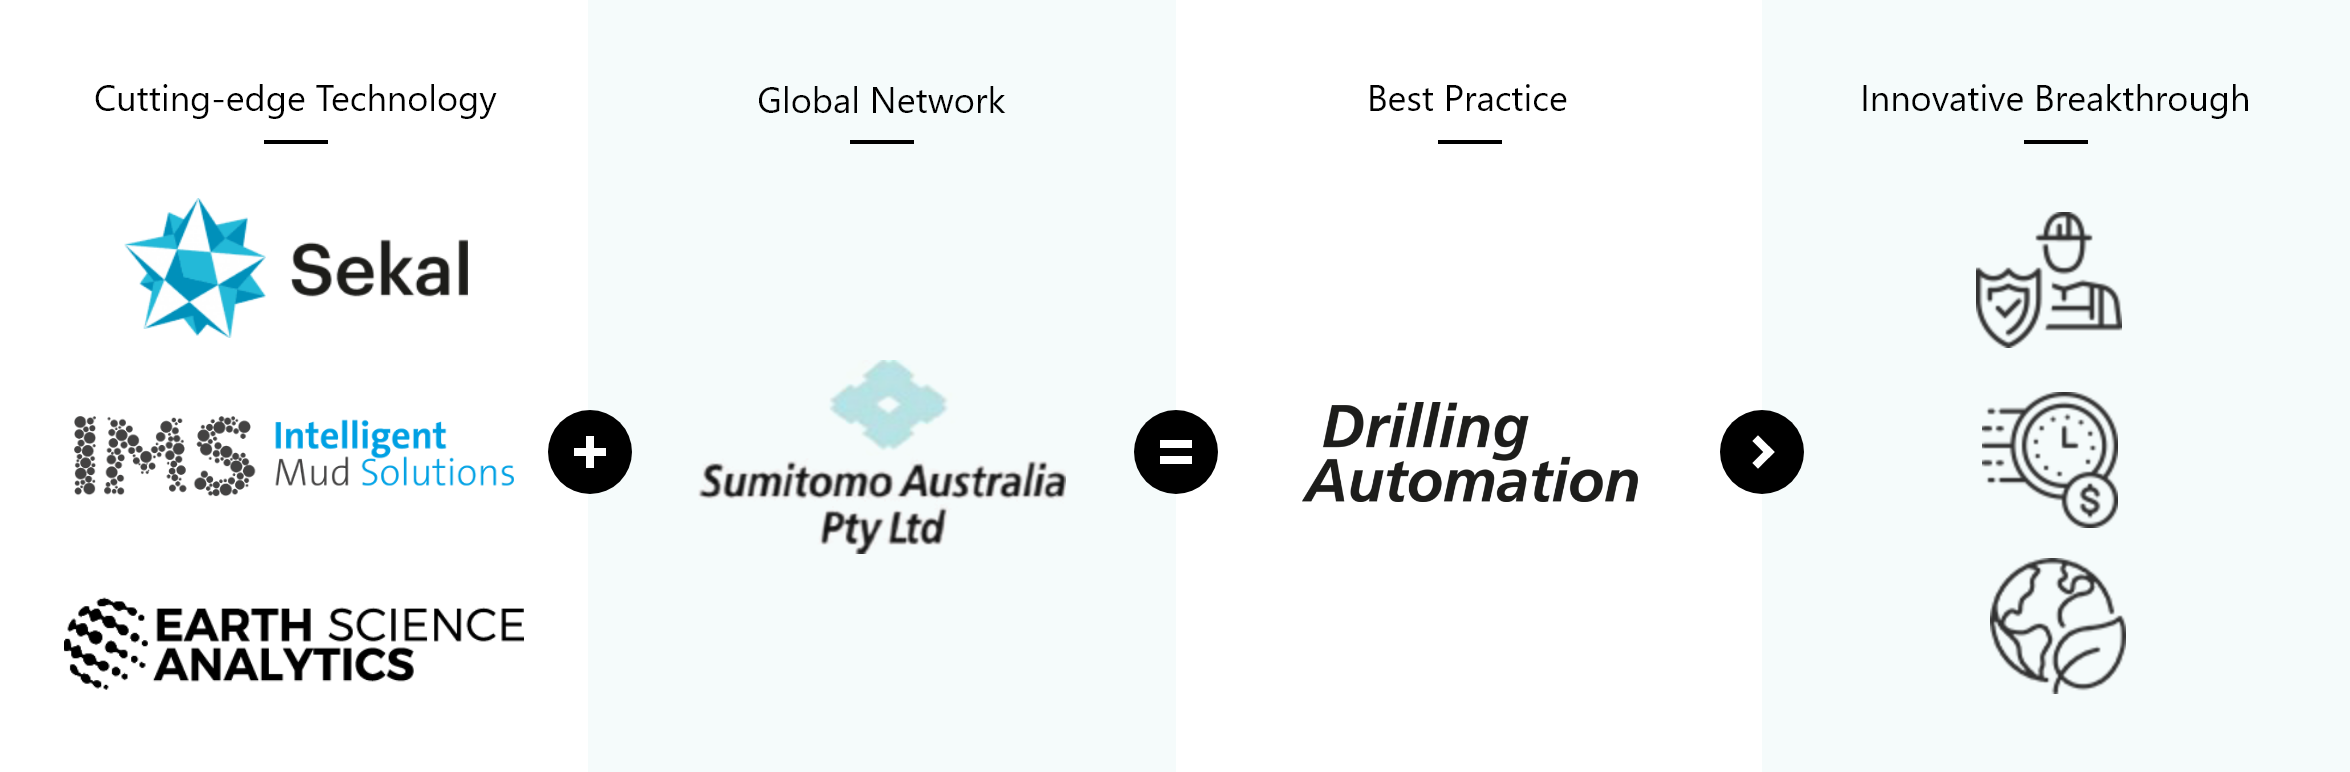 Drilling Automation provides enhanced insight into the reservoir to enable improved decision-making at each stage of oil and gas operations. This results in reduced opportunities for human error, both minimizing the risk of HSE incidents and increasing efficiency through reduced Non-Productive Time (NPT) and Invisible Lost Time (ILT). It also enables more efficient resource management to optimize both CapEx and OpEx over time.